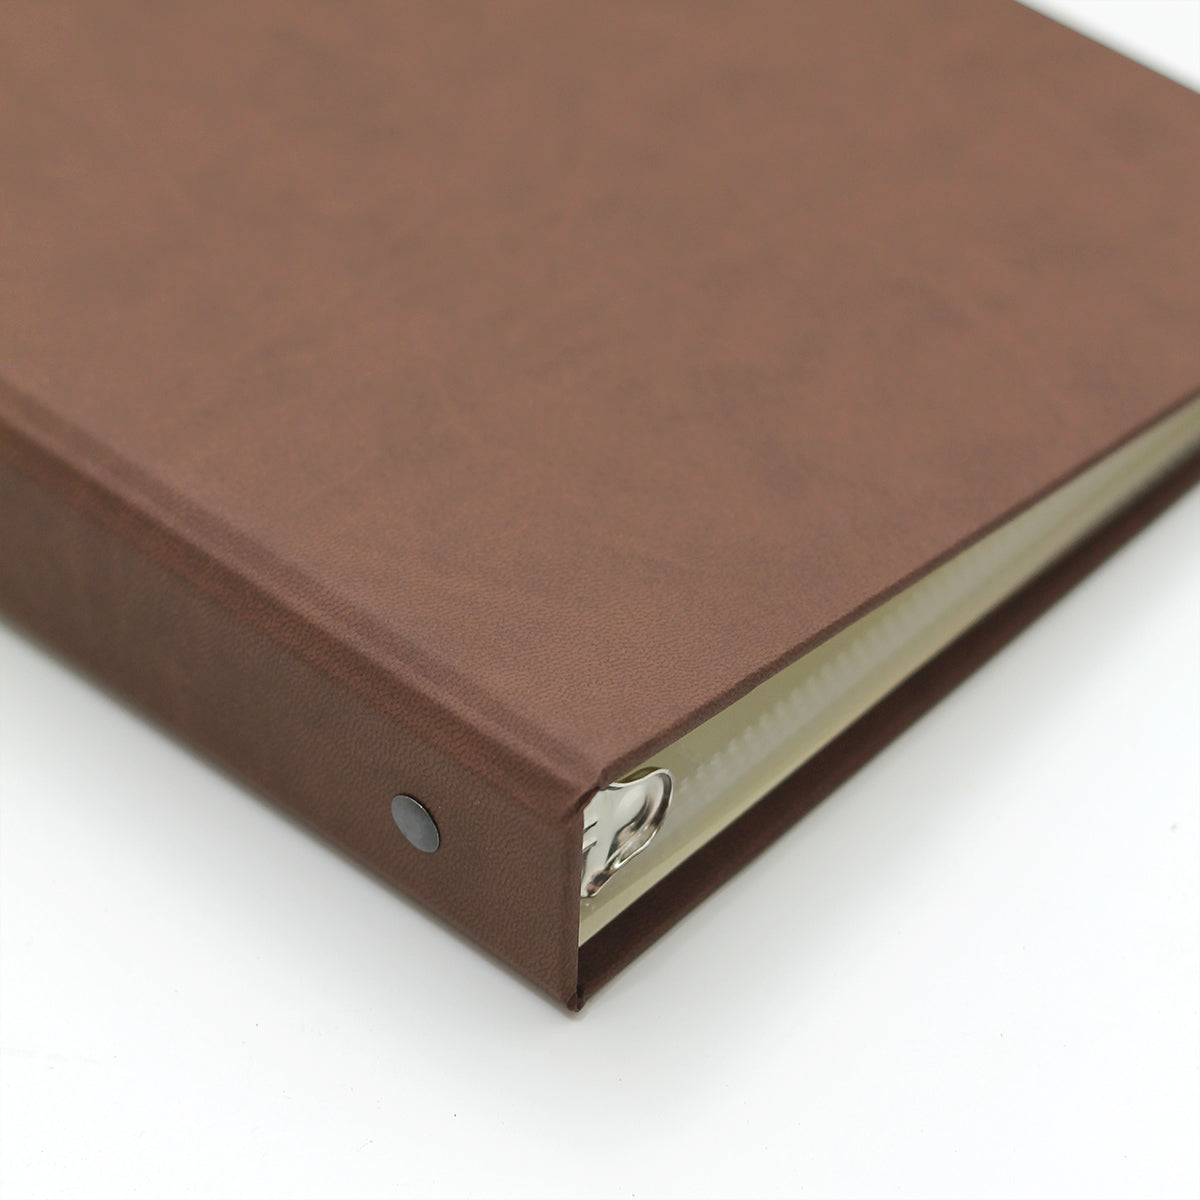 Medium Photo Binder For 4x6 Photos | Cover: Mocha Vegan Leather | Available Personalized